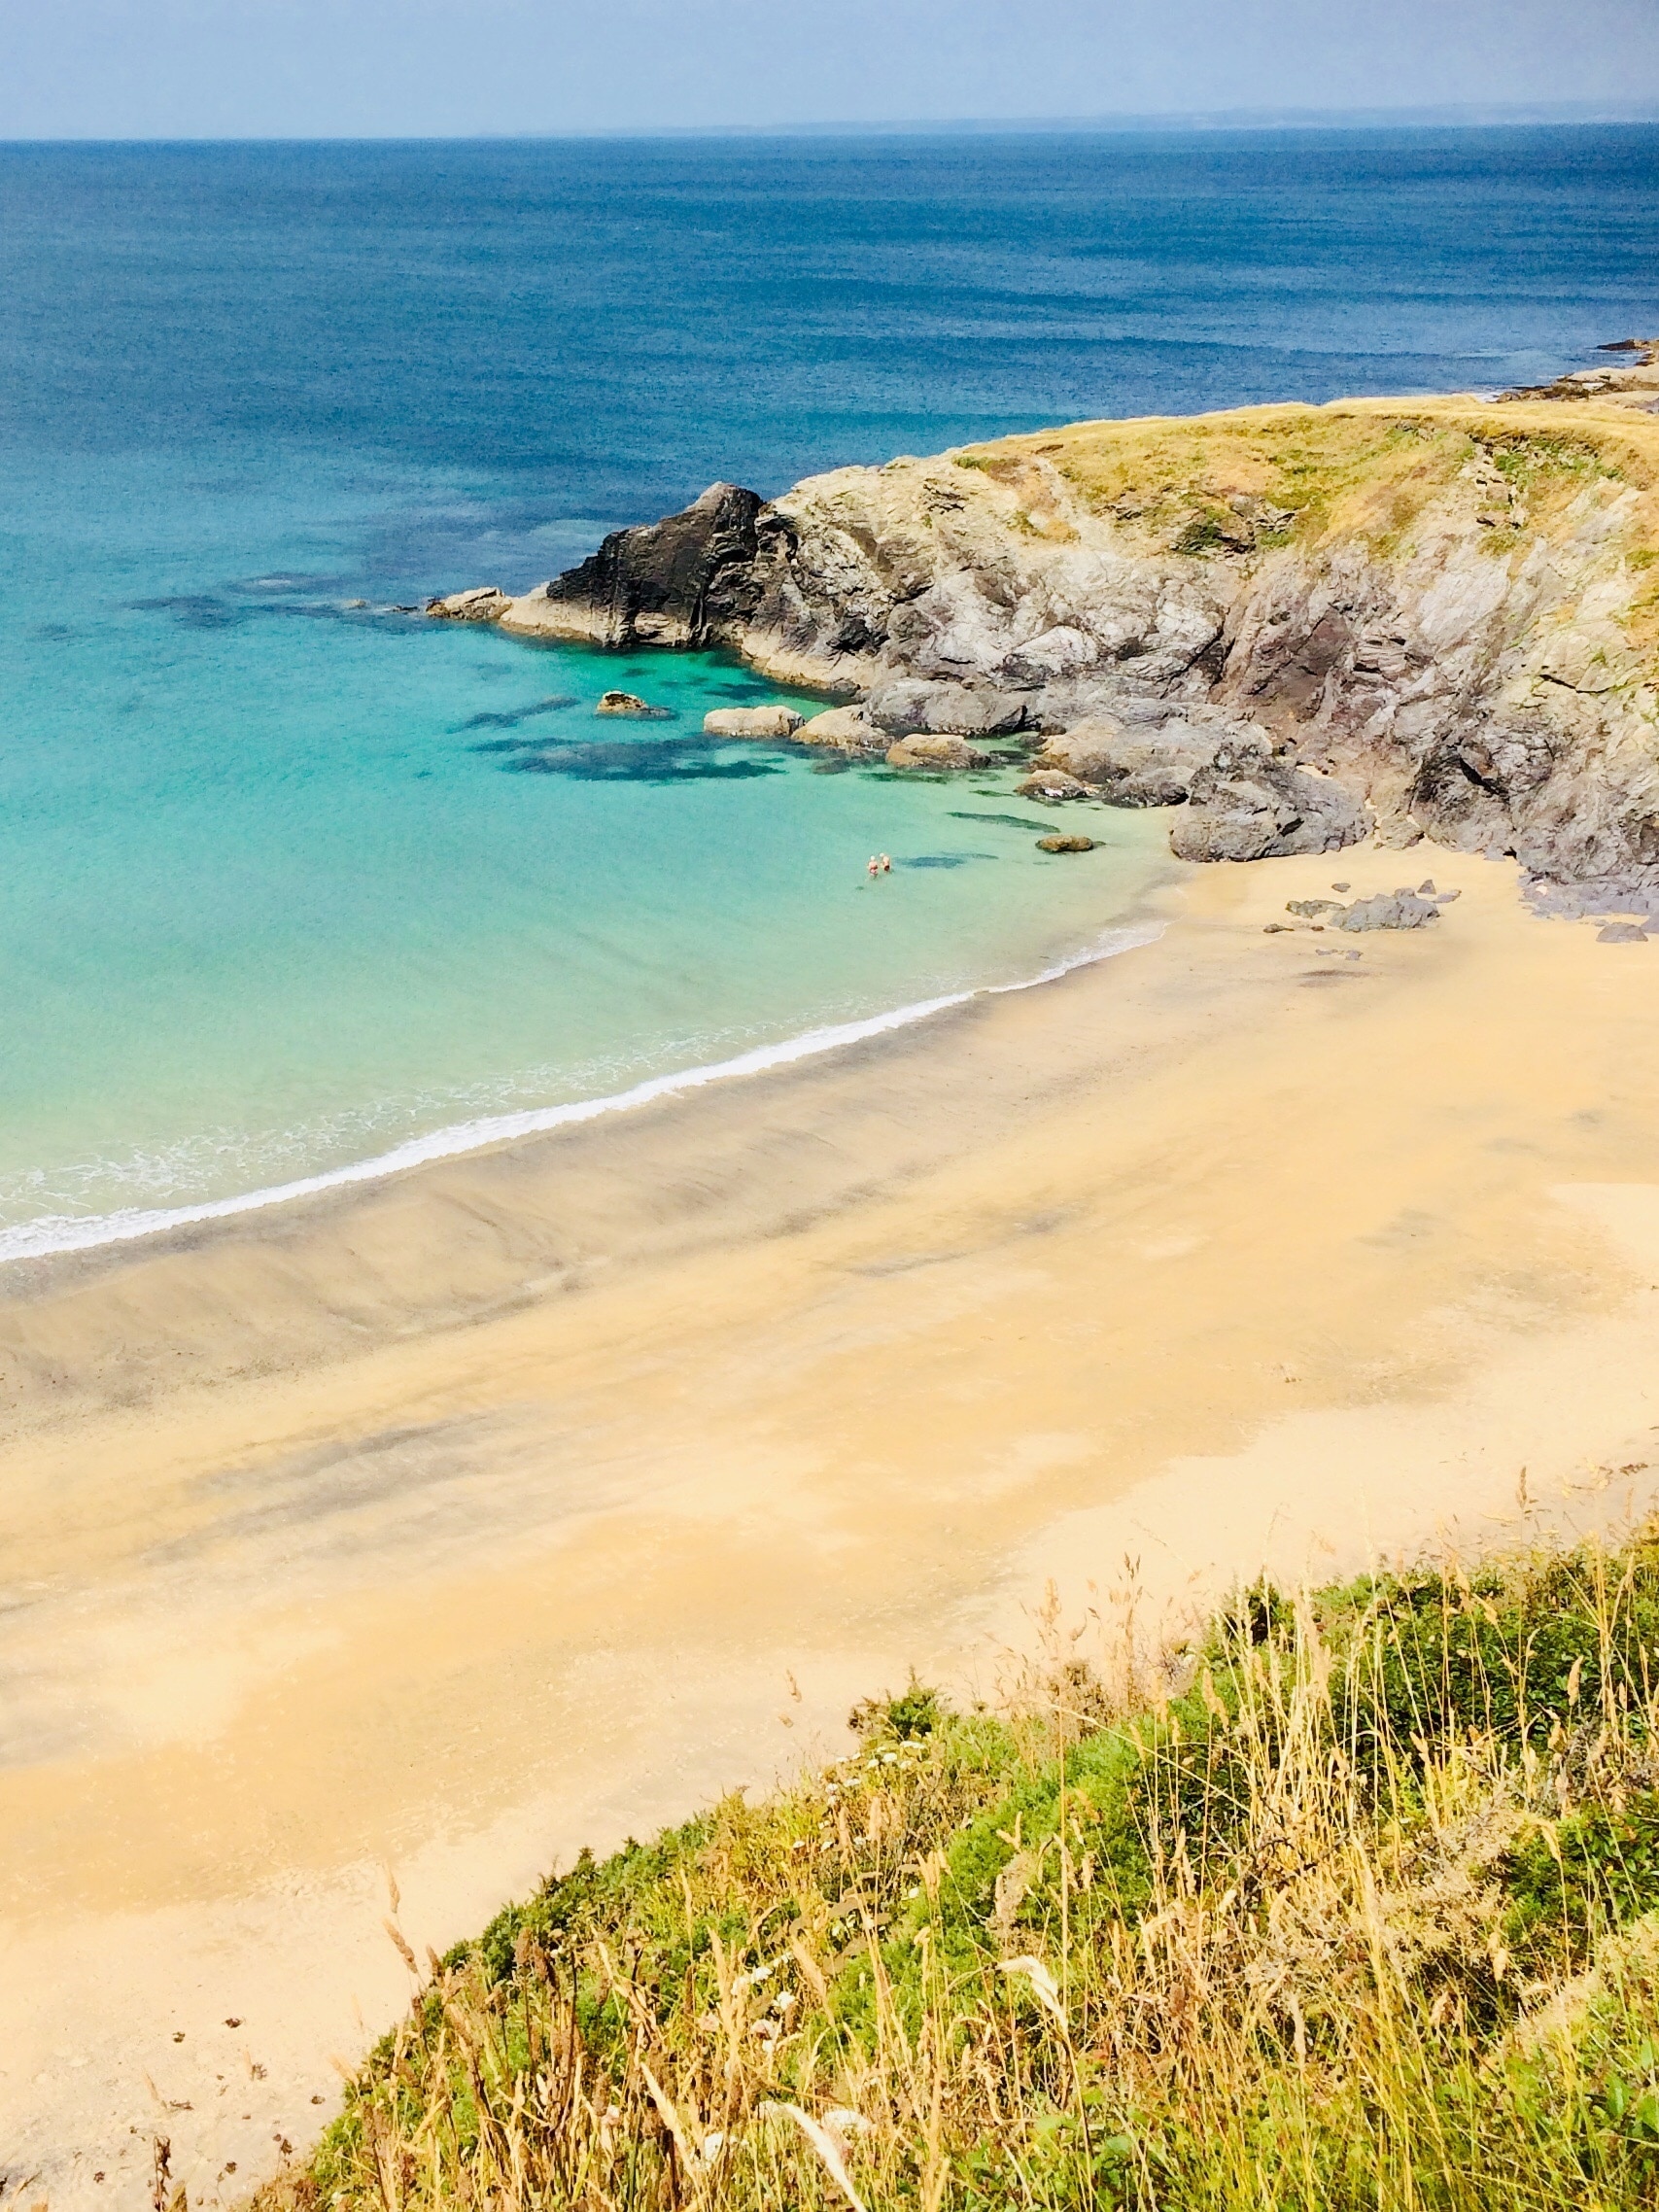 Another stunning beach ,found just off the Cornish coastal path ,from Kynance cove Cornwall .Walked from the Lizard point on a beautiful sunny day in July 2018